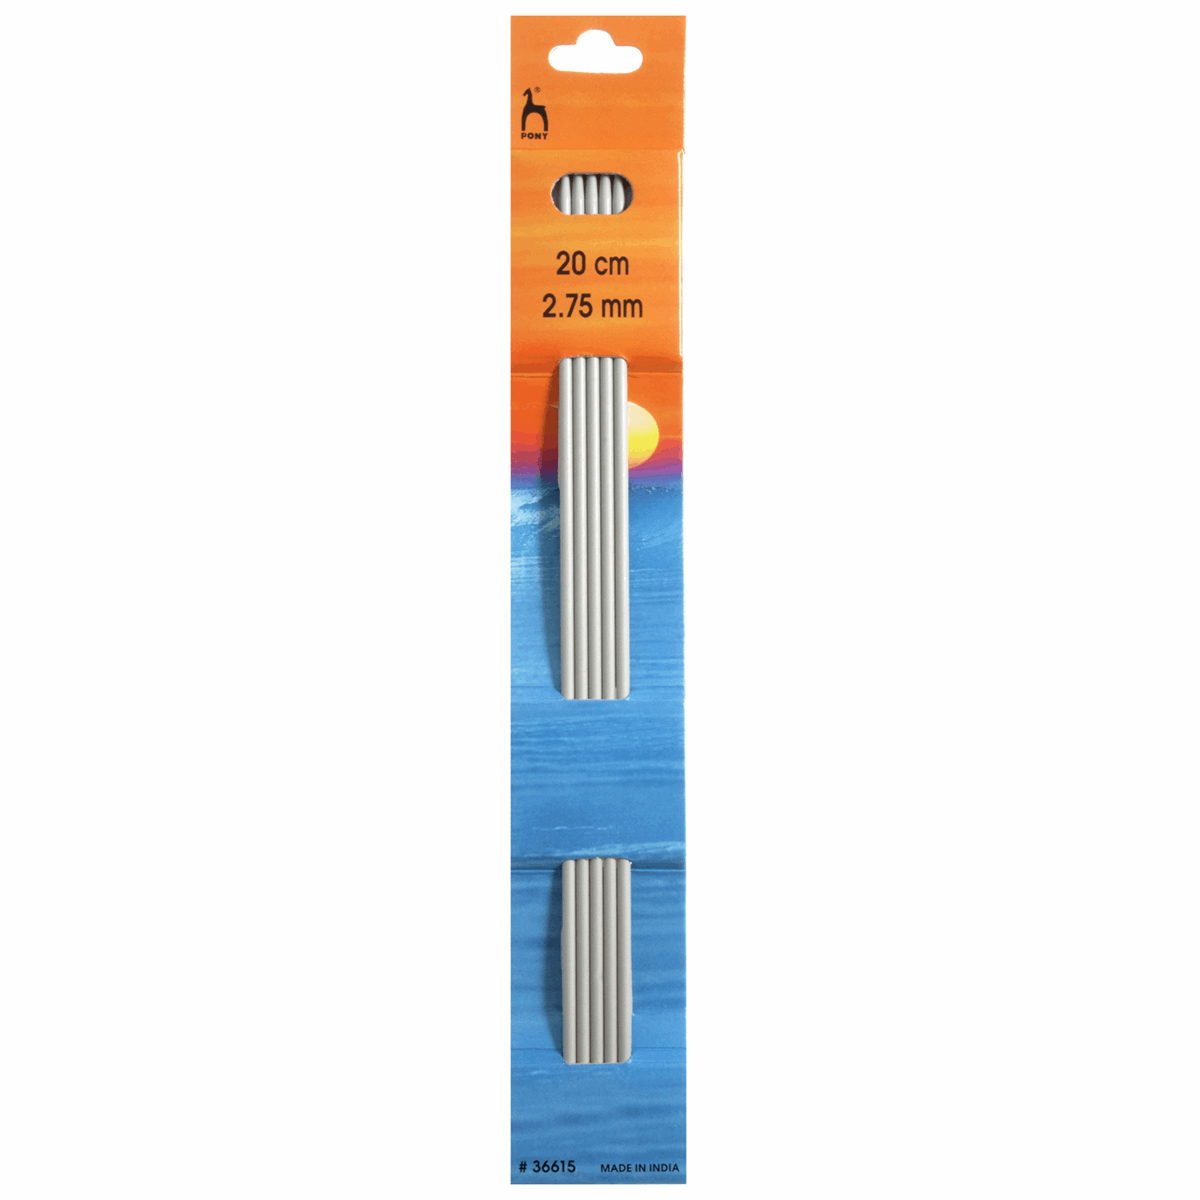 PONY Double-Ended Knitting Pins - 20cm x 2.75mm (Set of 5)